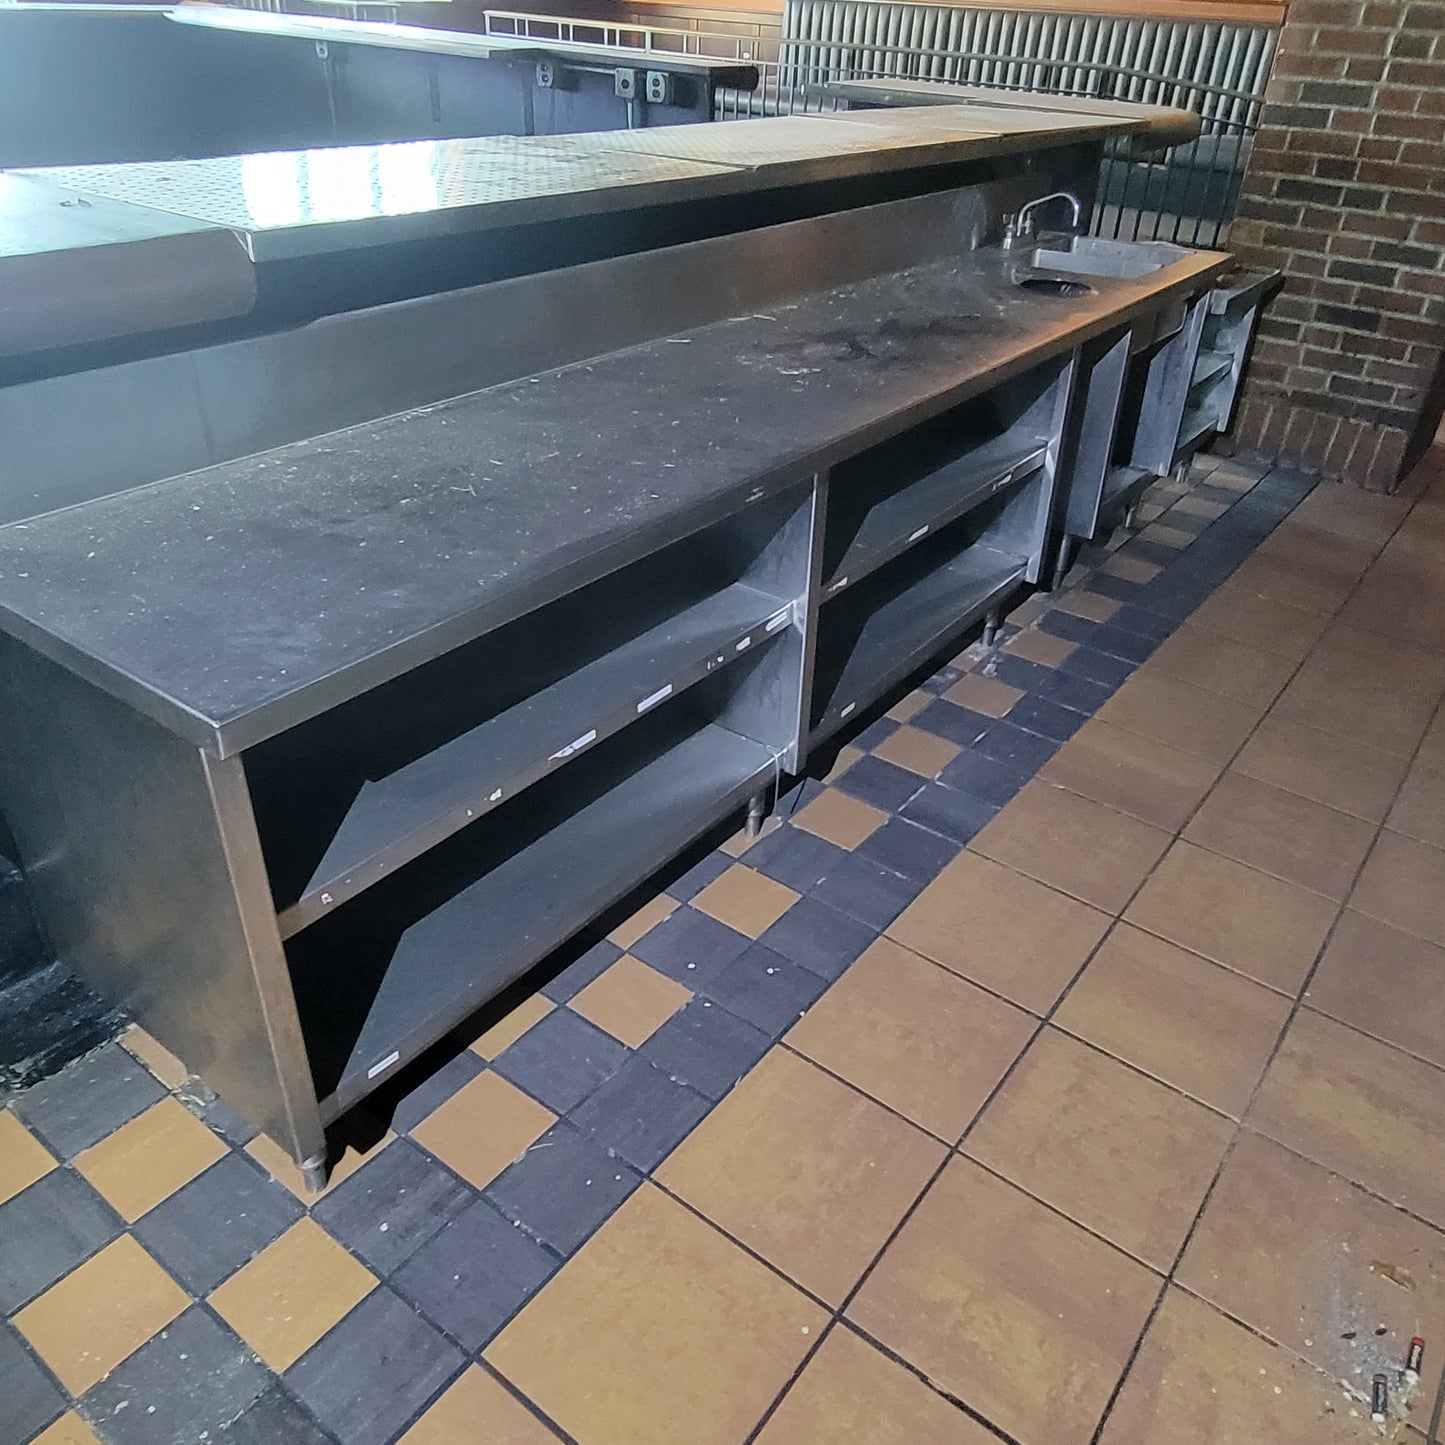 Stainless Steel Prep Counter w/2 Tub Sink